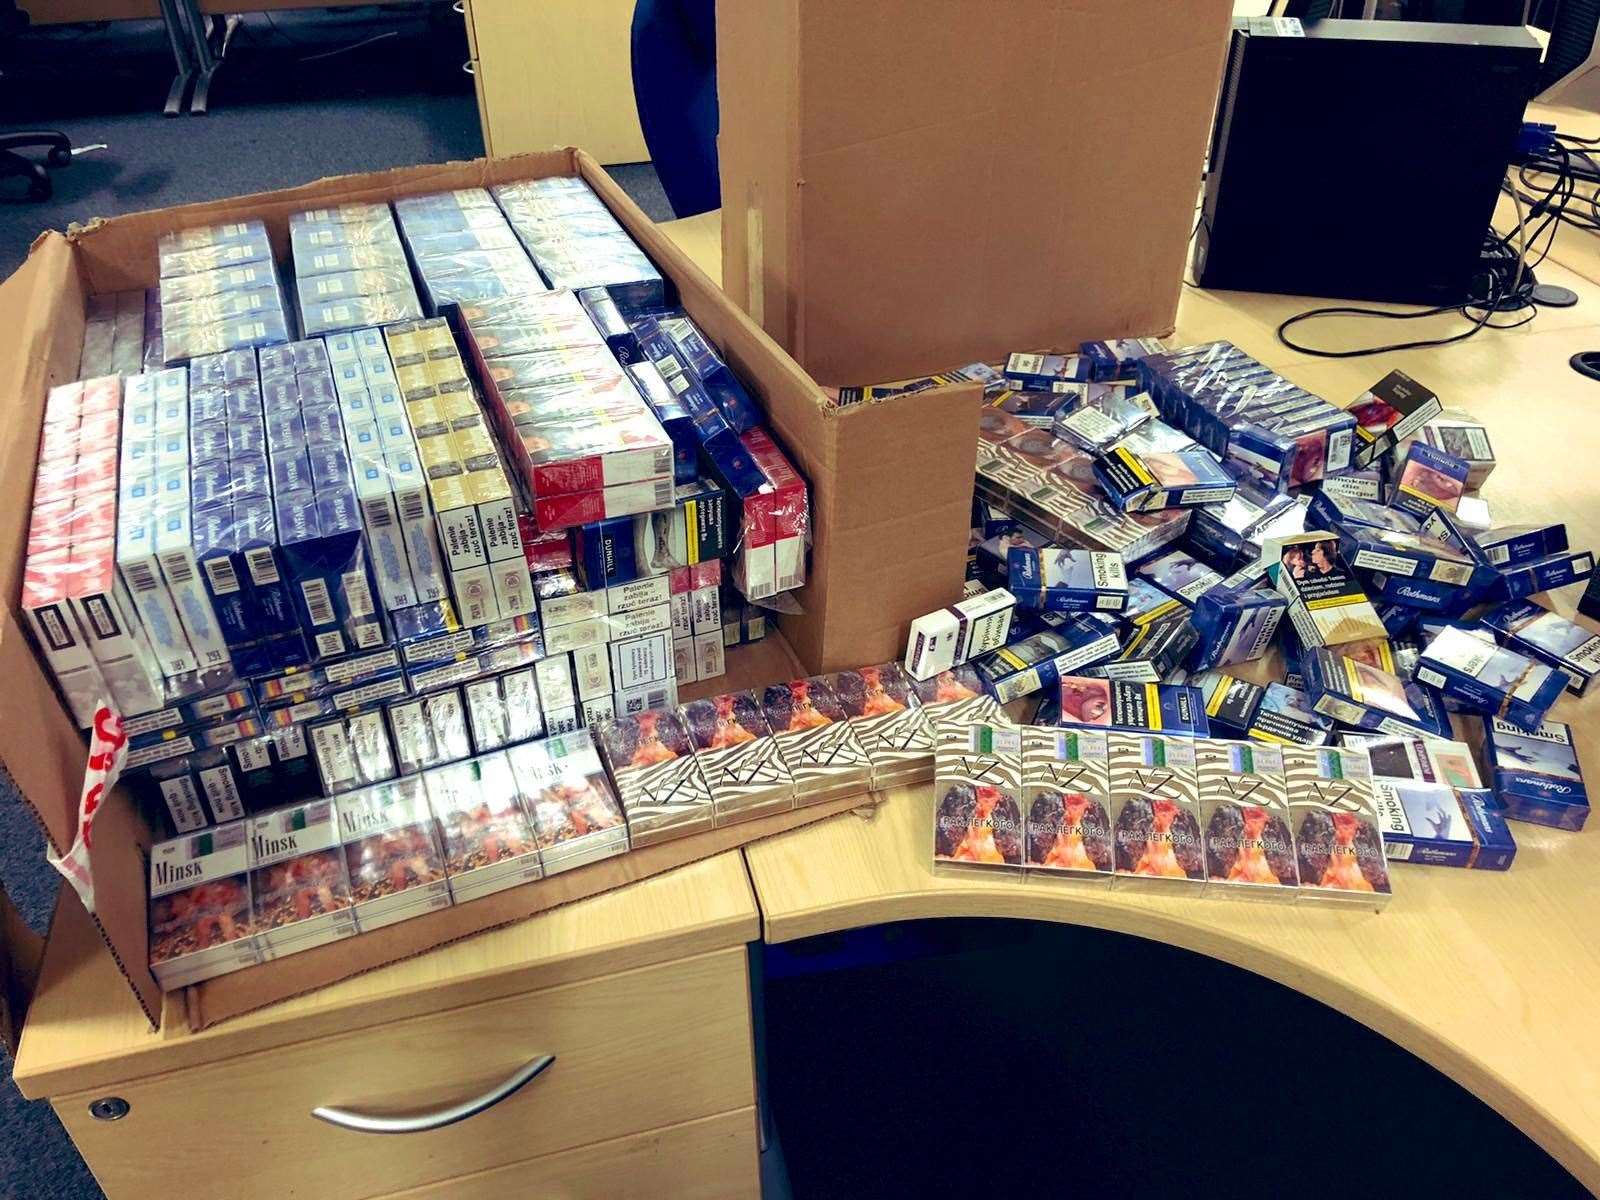 The haul of illegal cigarettes found in the boot of the car in Medway. Picture: Kent Police Medway